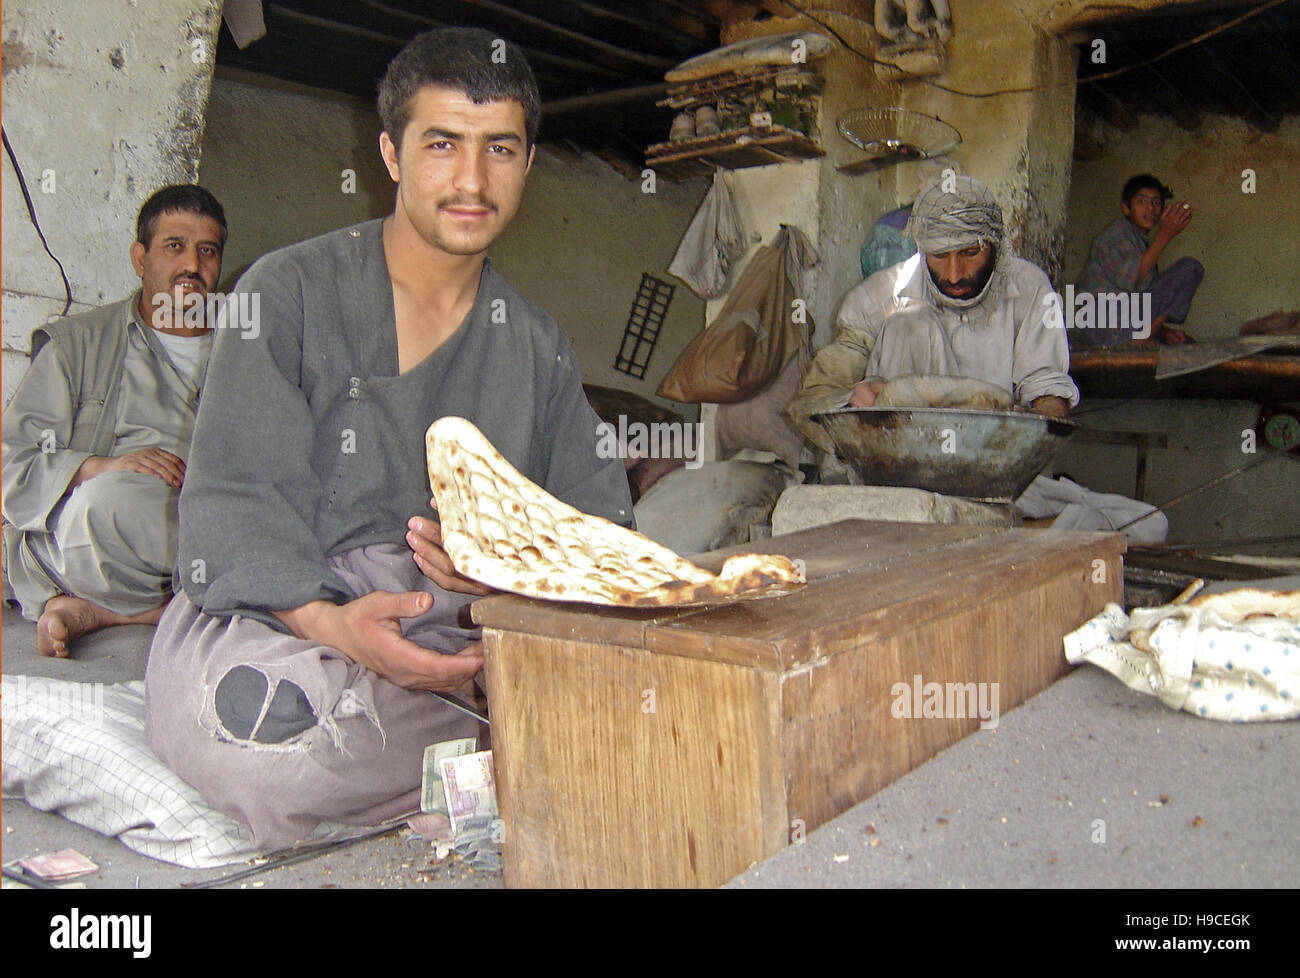 31st May 2004 A street-side bakery selling traditional Afghan bread in Kabul, Afghanistan. Stock Photo